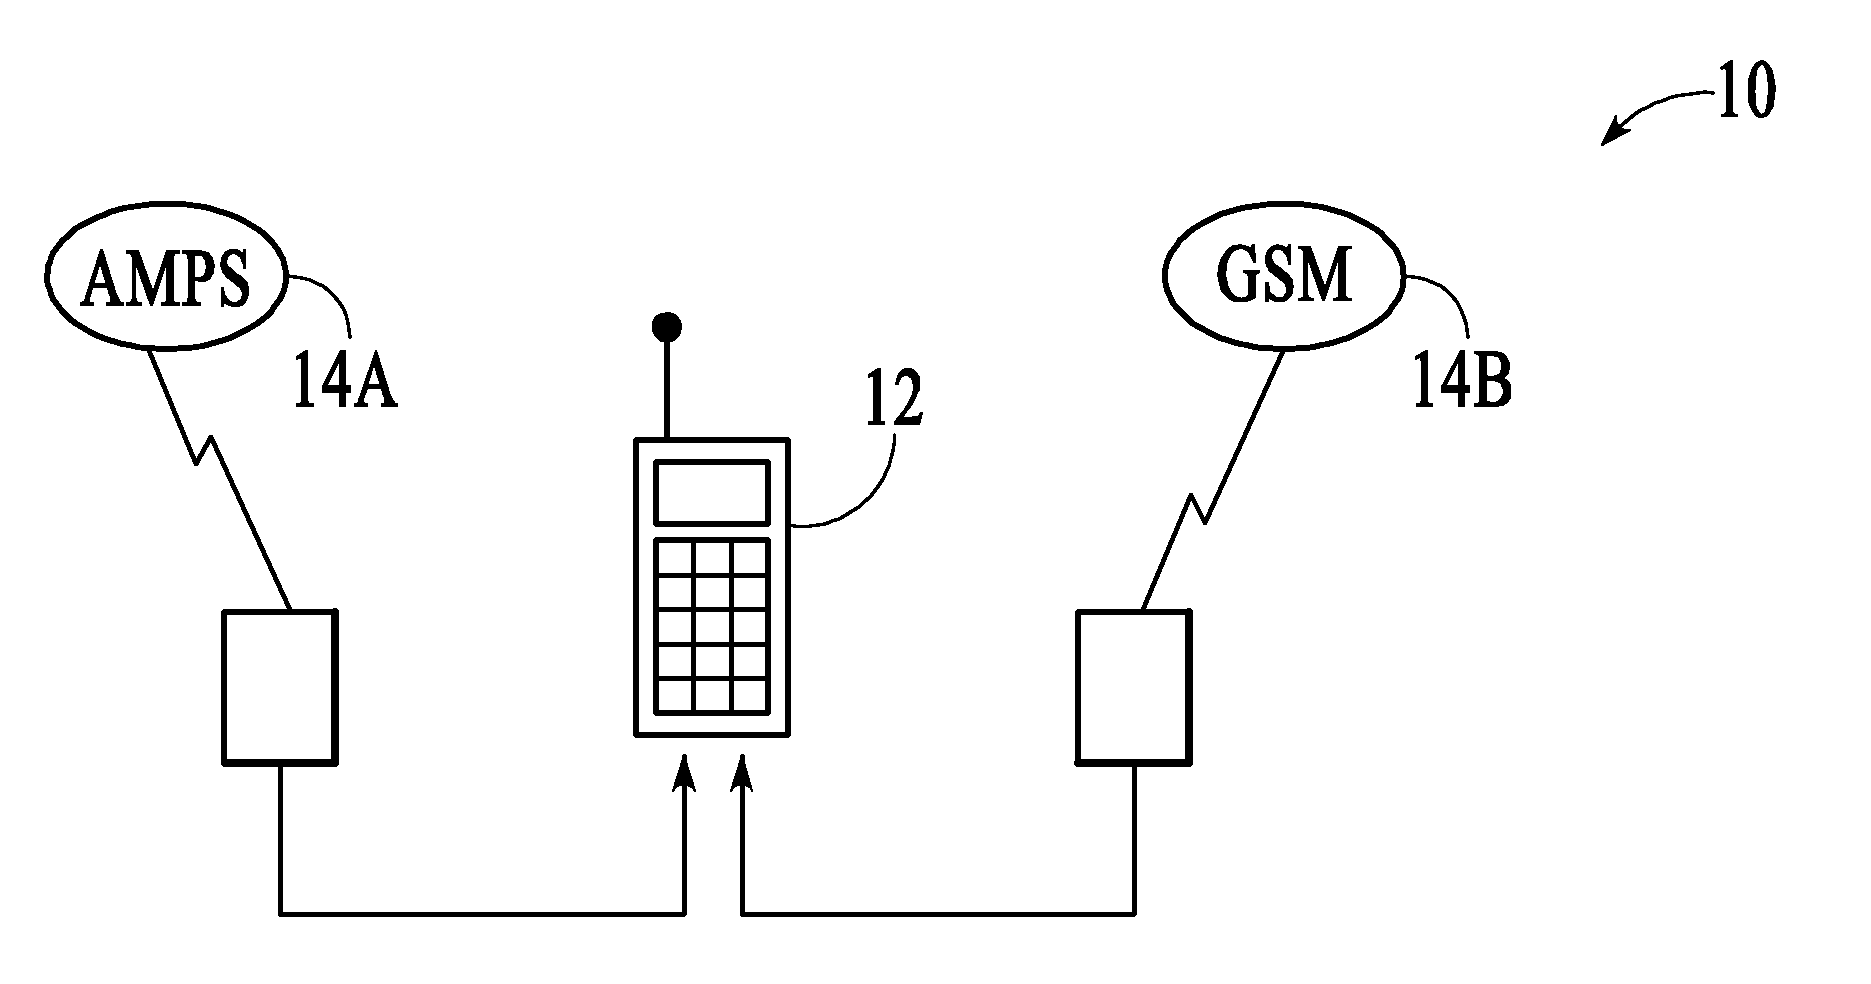 Methods and apparatus for a flexible wireless communication and cellular telephone system